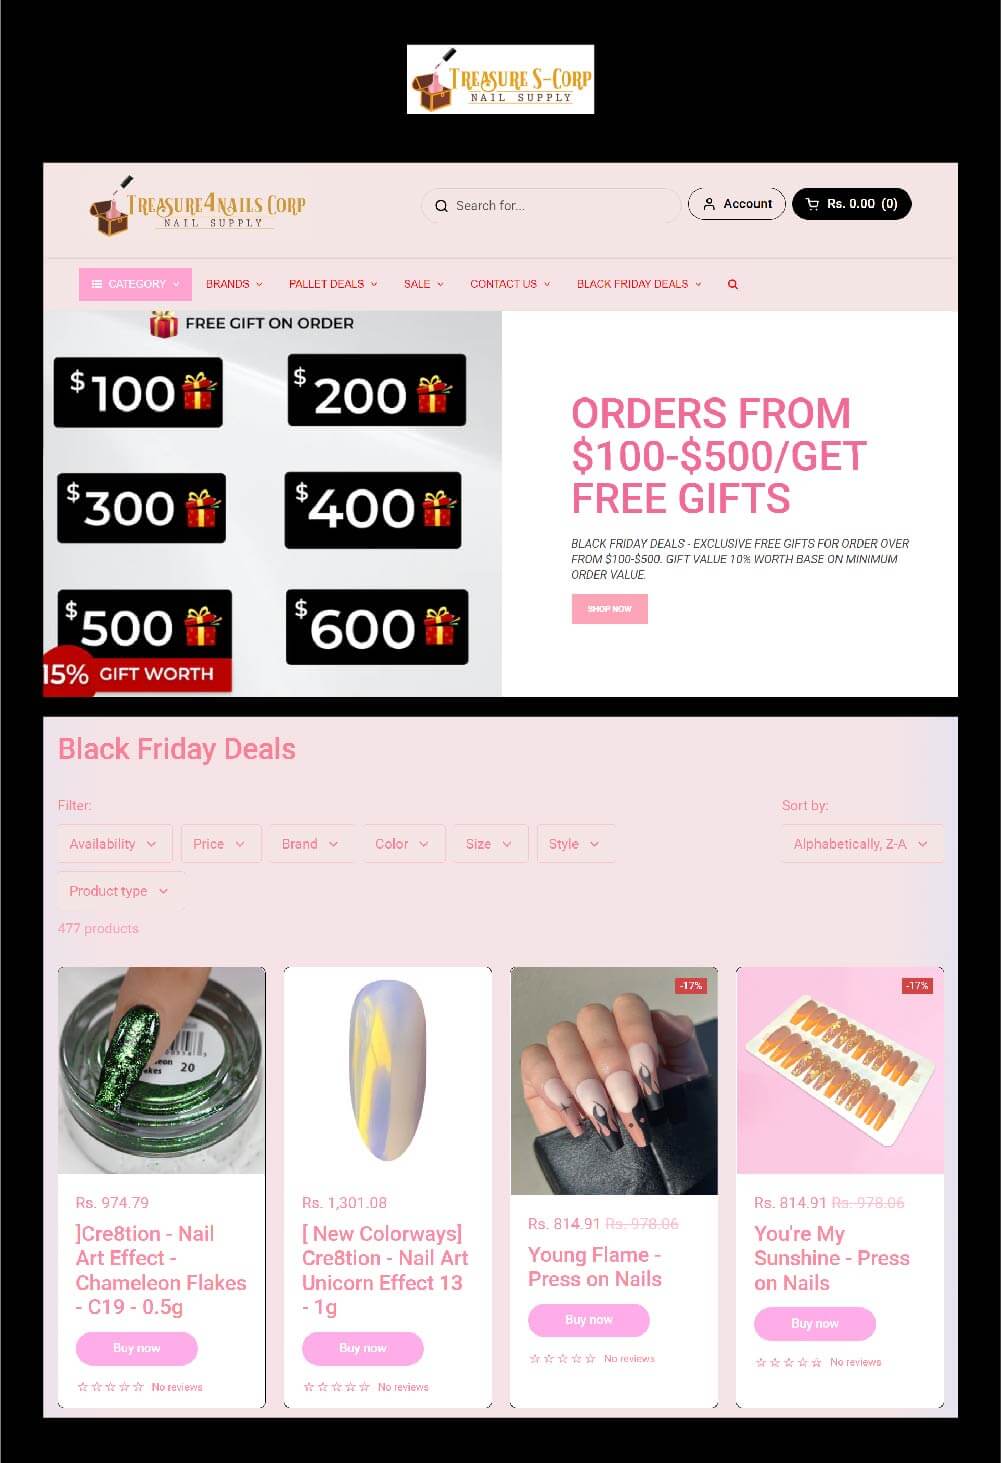 Treasure4nails free gift on orders minmum spend reward black friday sale offers landing page nails supplies gel extensions